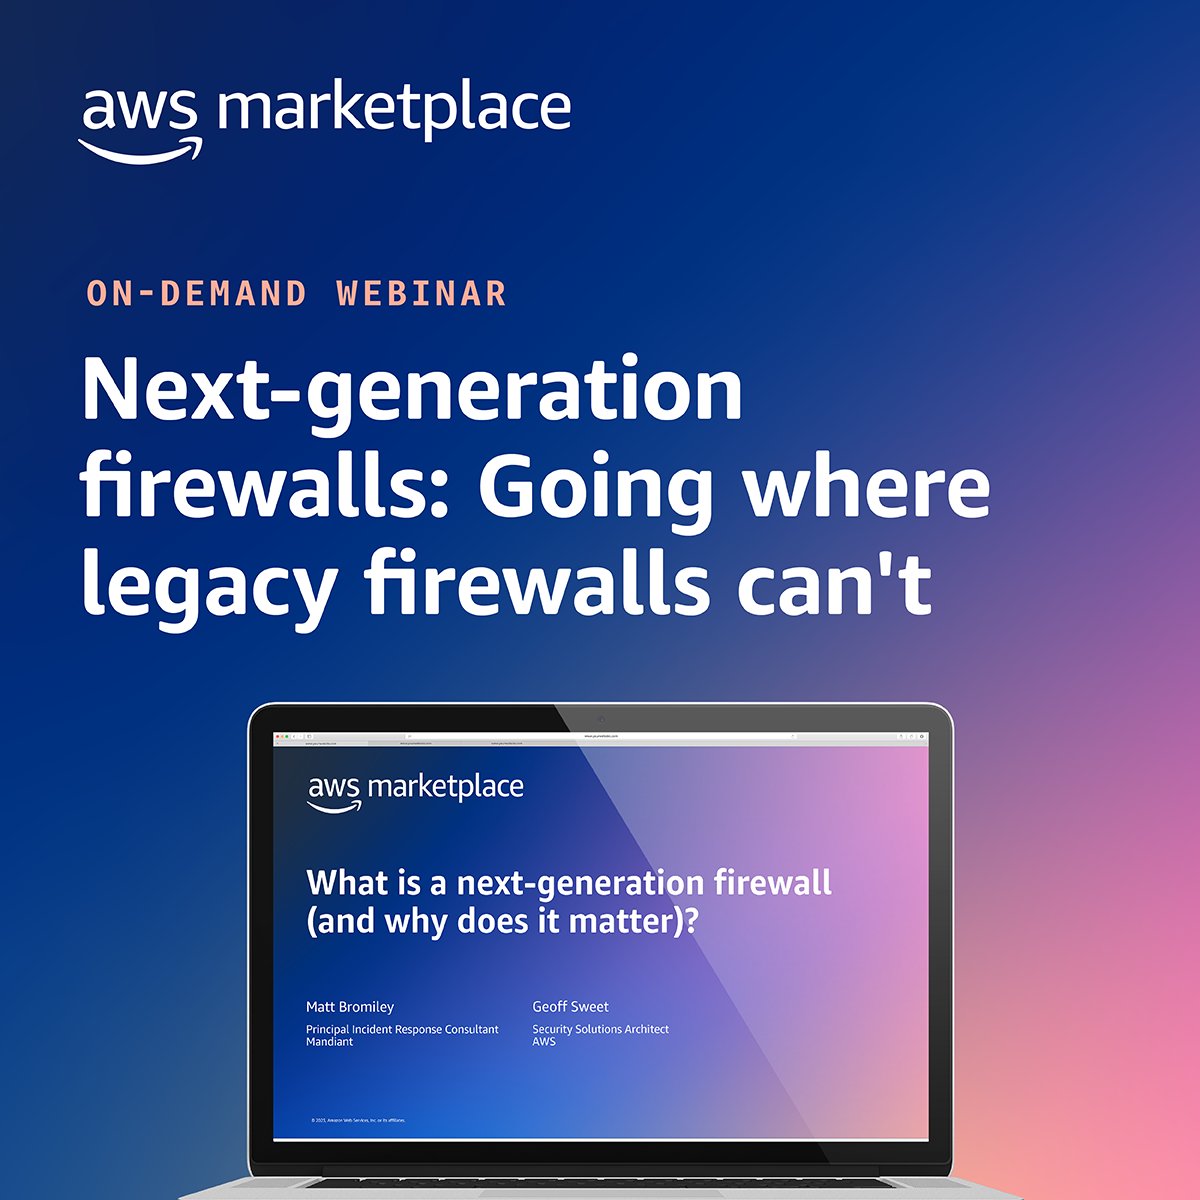 Next-generation firewalls go where legacy firewalls can’t—providing advanced threat and malware detection and IDS/IPS capabilities in addition to keeping you compliant. Discover how—watch the on-demand webinar now: go.aws/3UWgmg9 #cloudsecurity